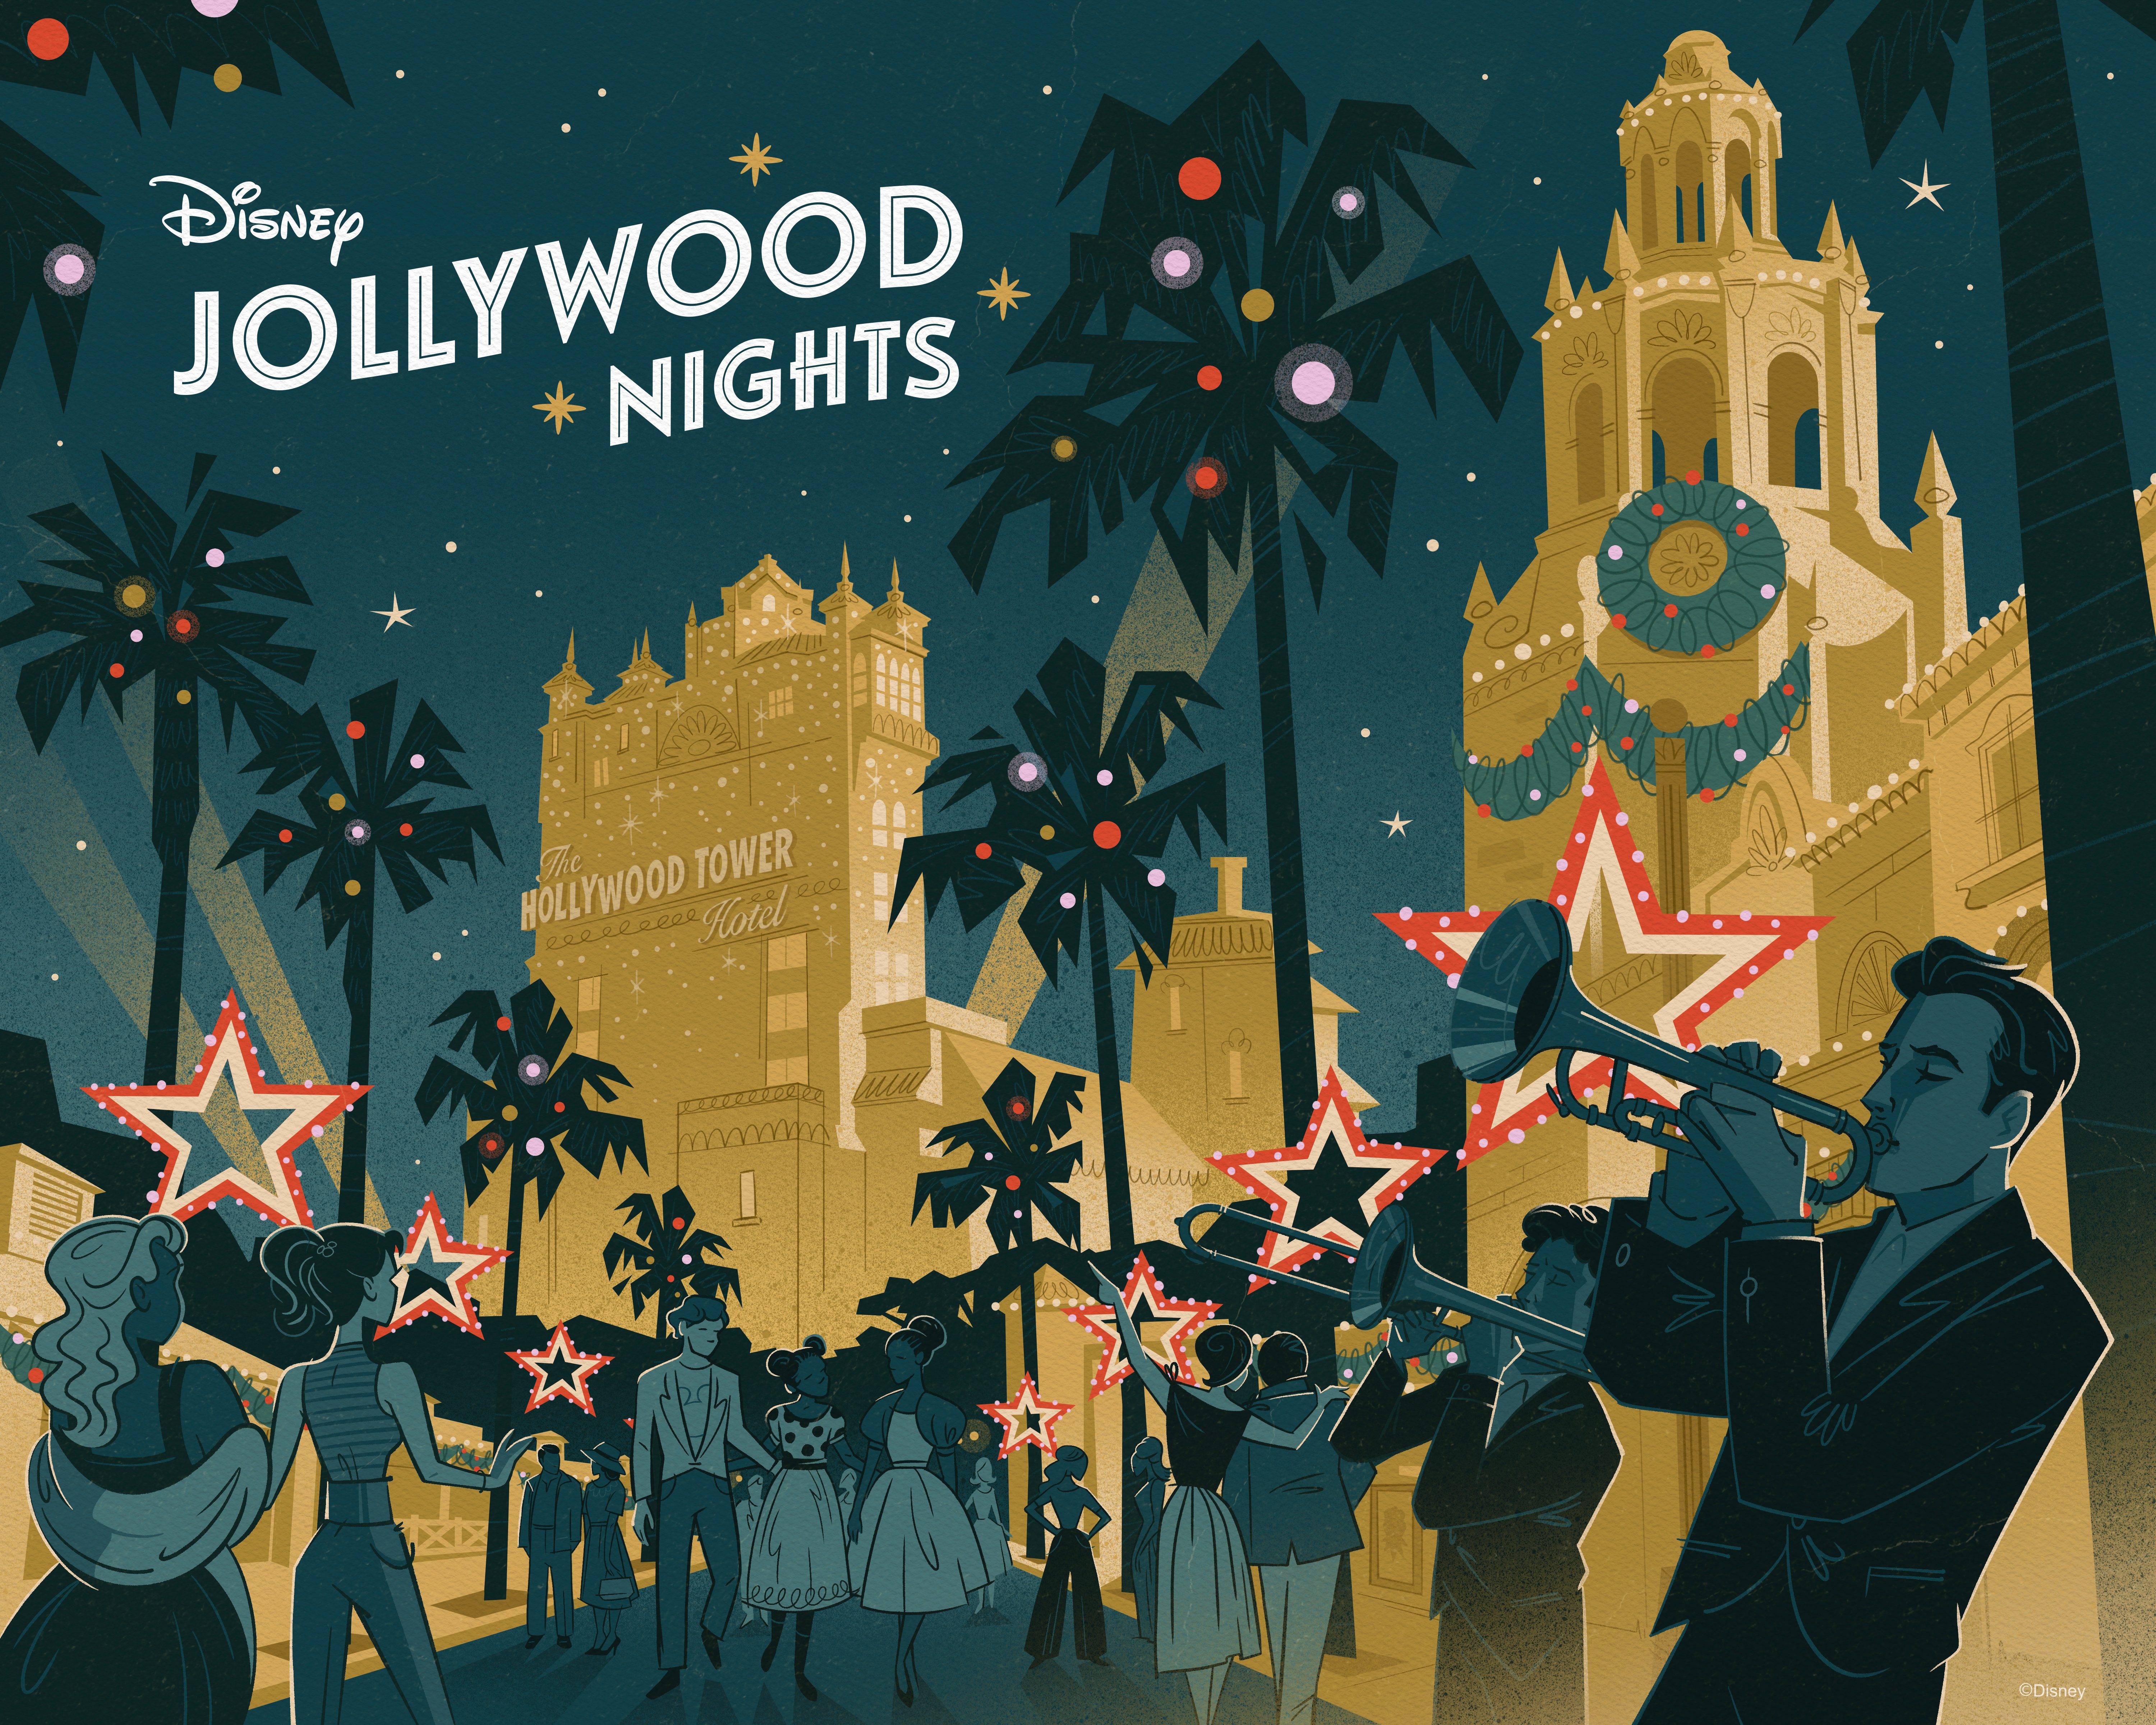 Entertainment showtimes and attraction line-up confirmed for Disney Jollywood Nights at Walt Disney World